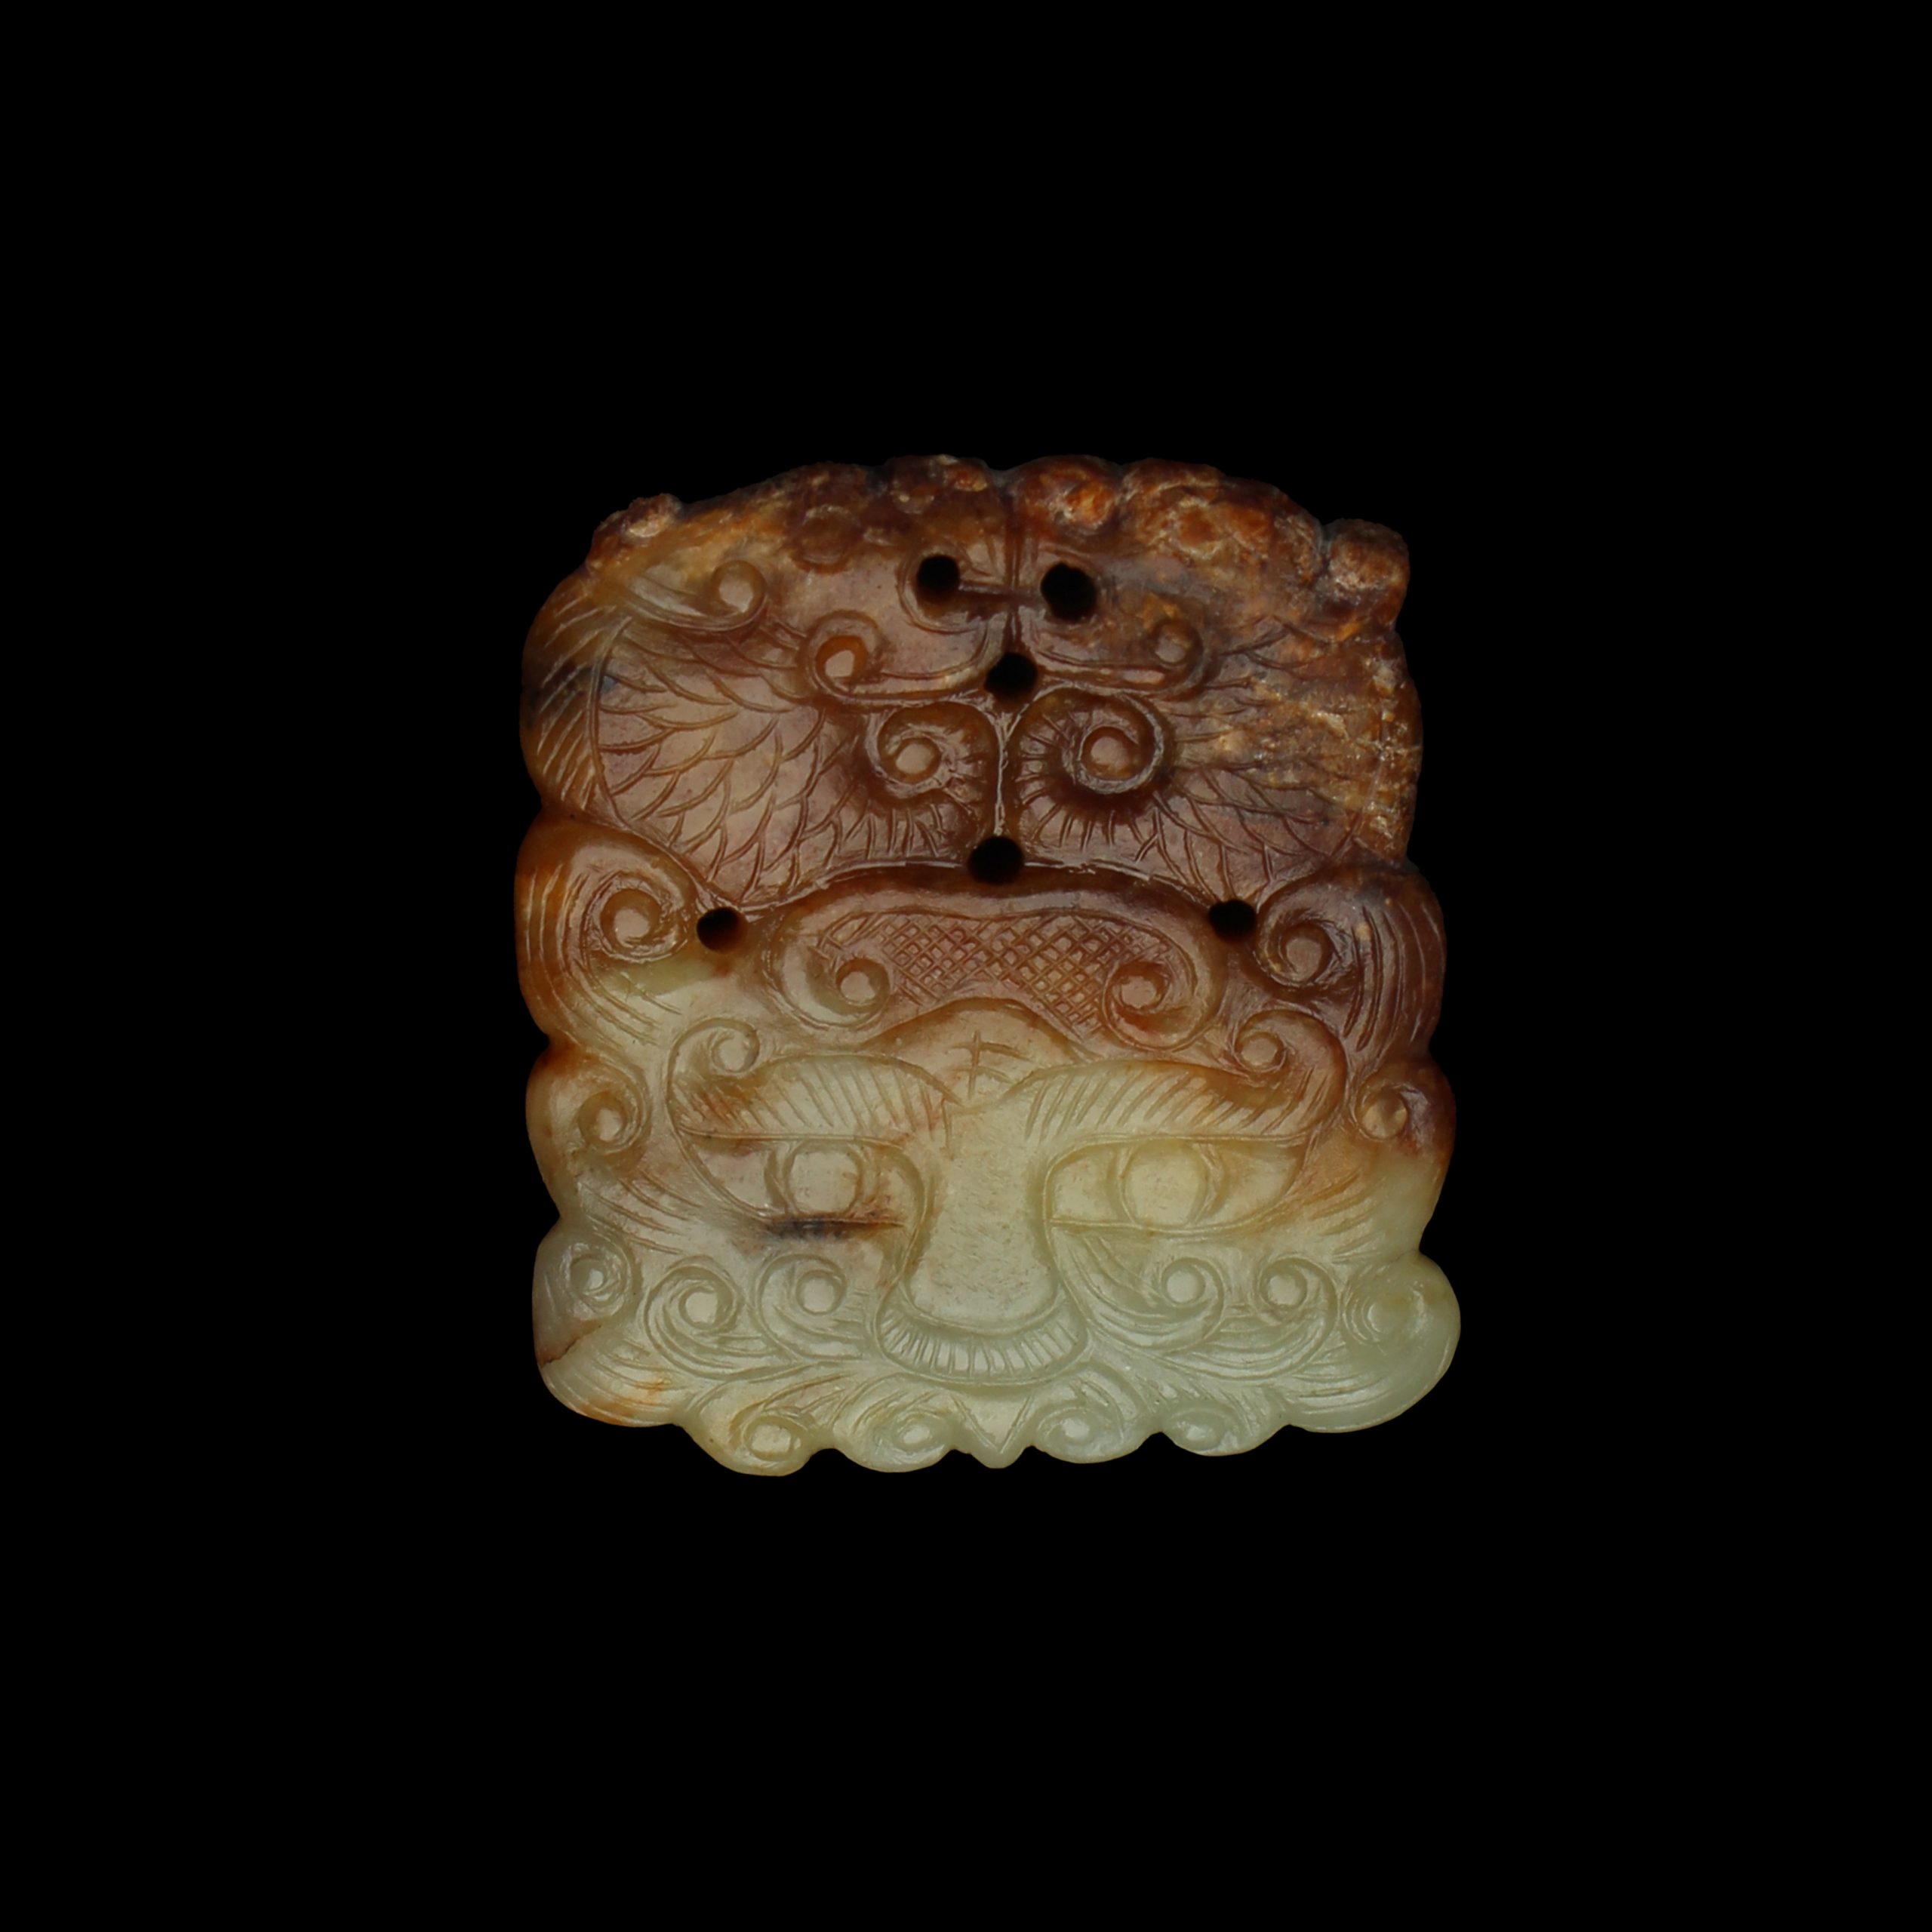 Sold at Auction: RARE MATERIAL CARVING 12 CHINESE ZODIAC BRACELET